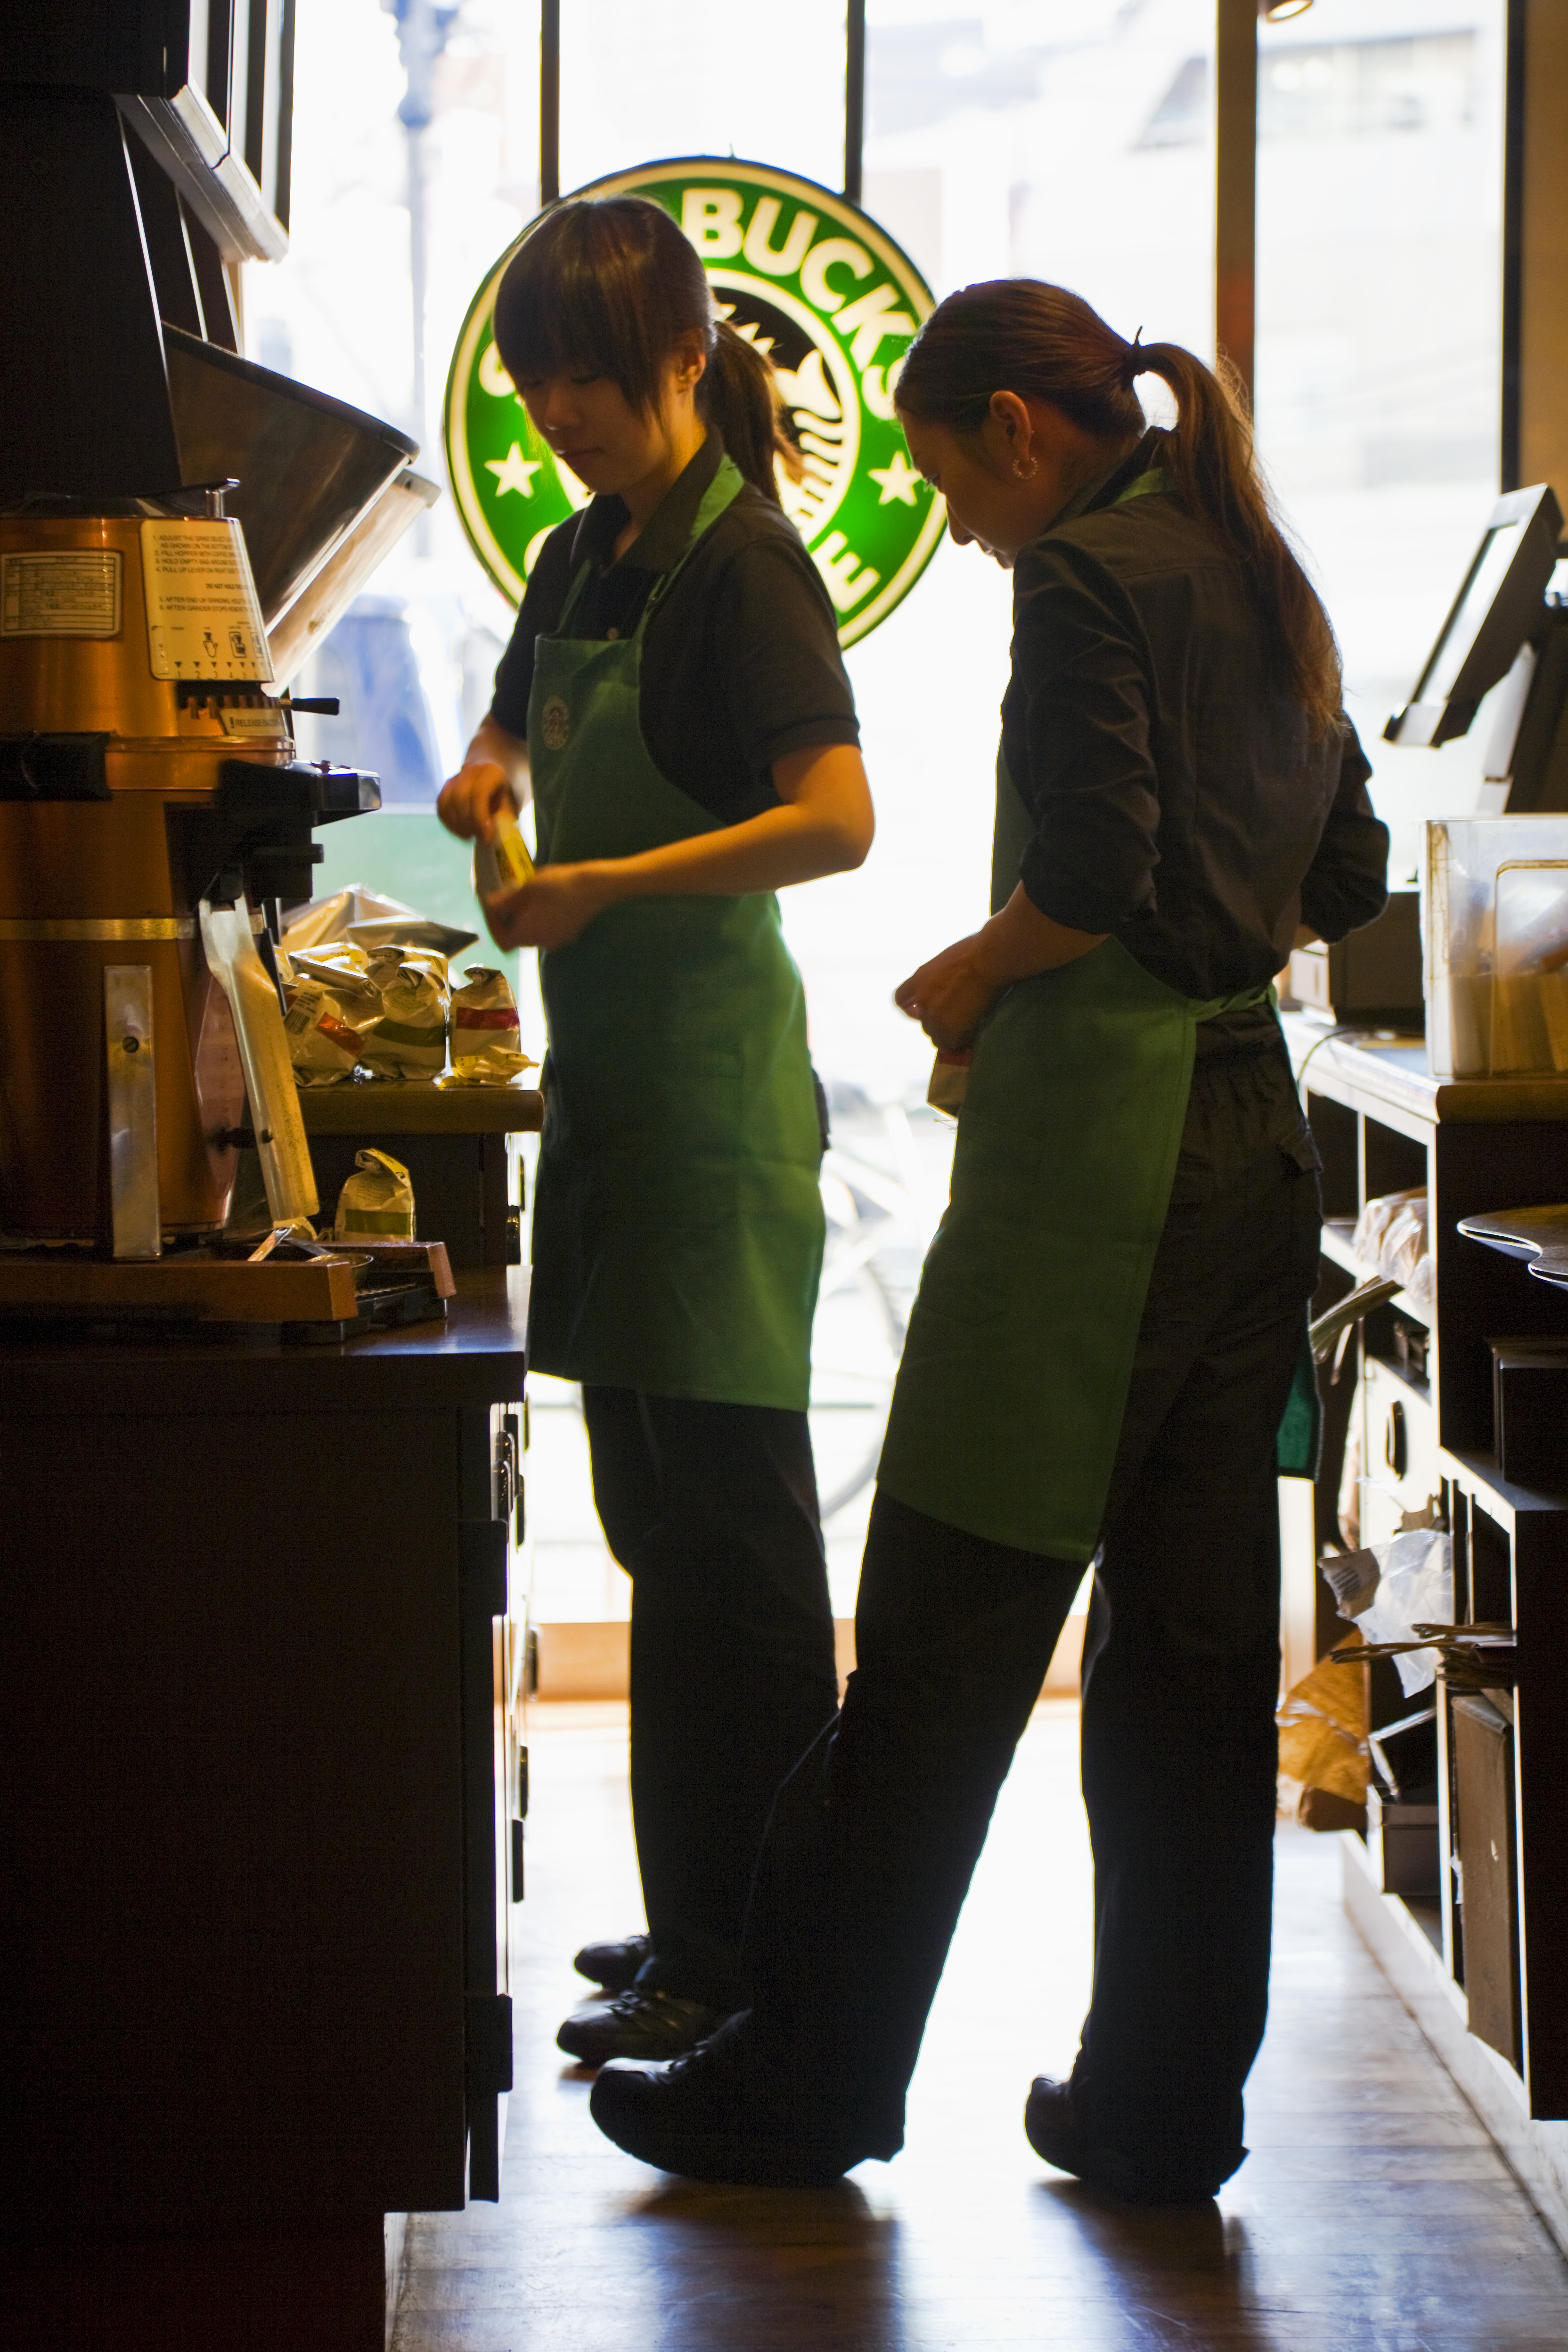 Two baristas in green aprons working behind the counter at a Starbucks store